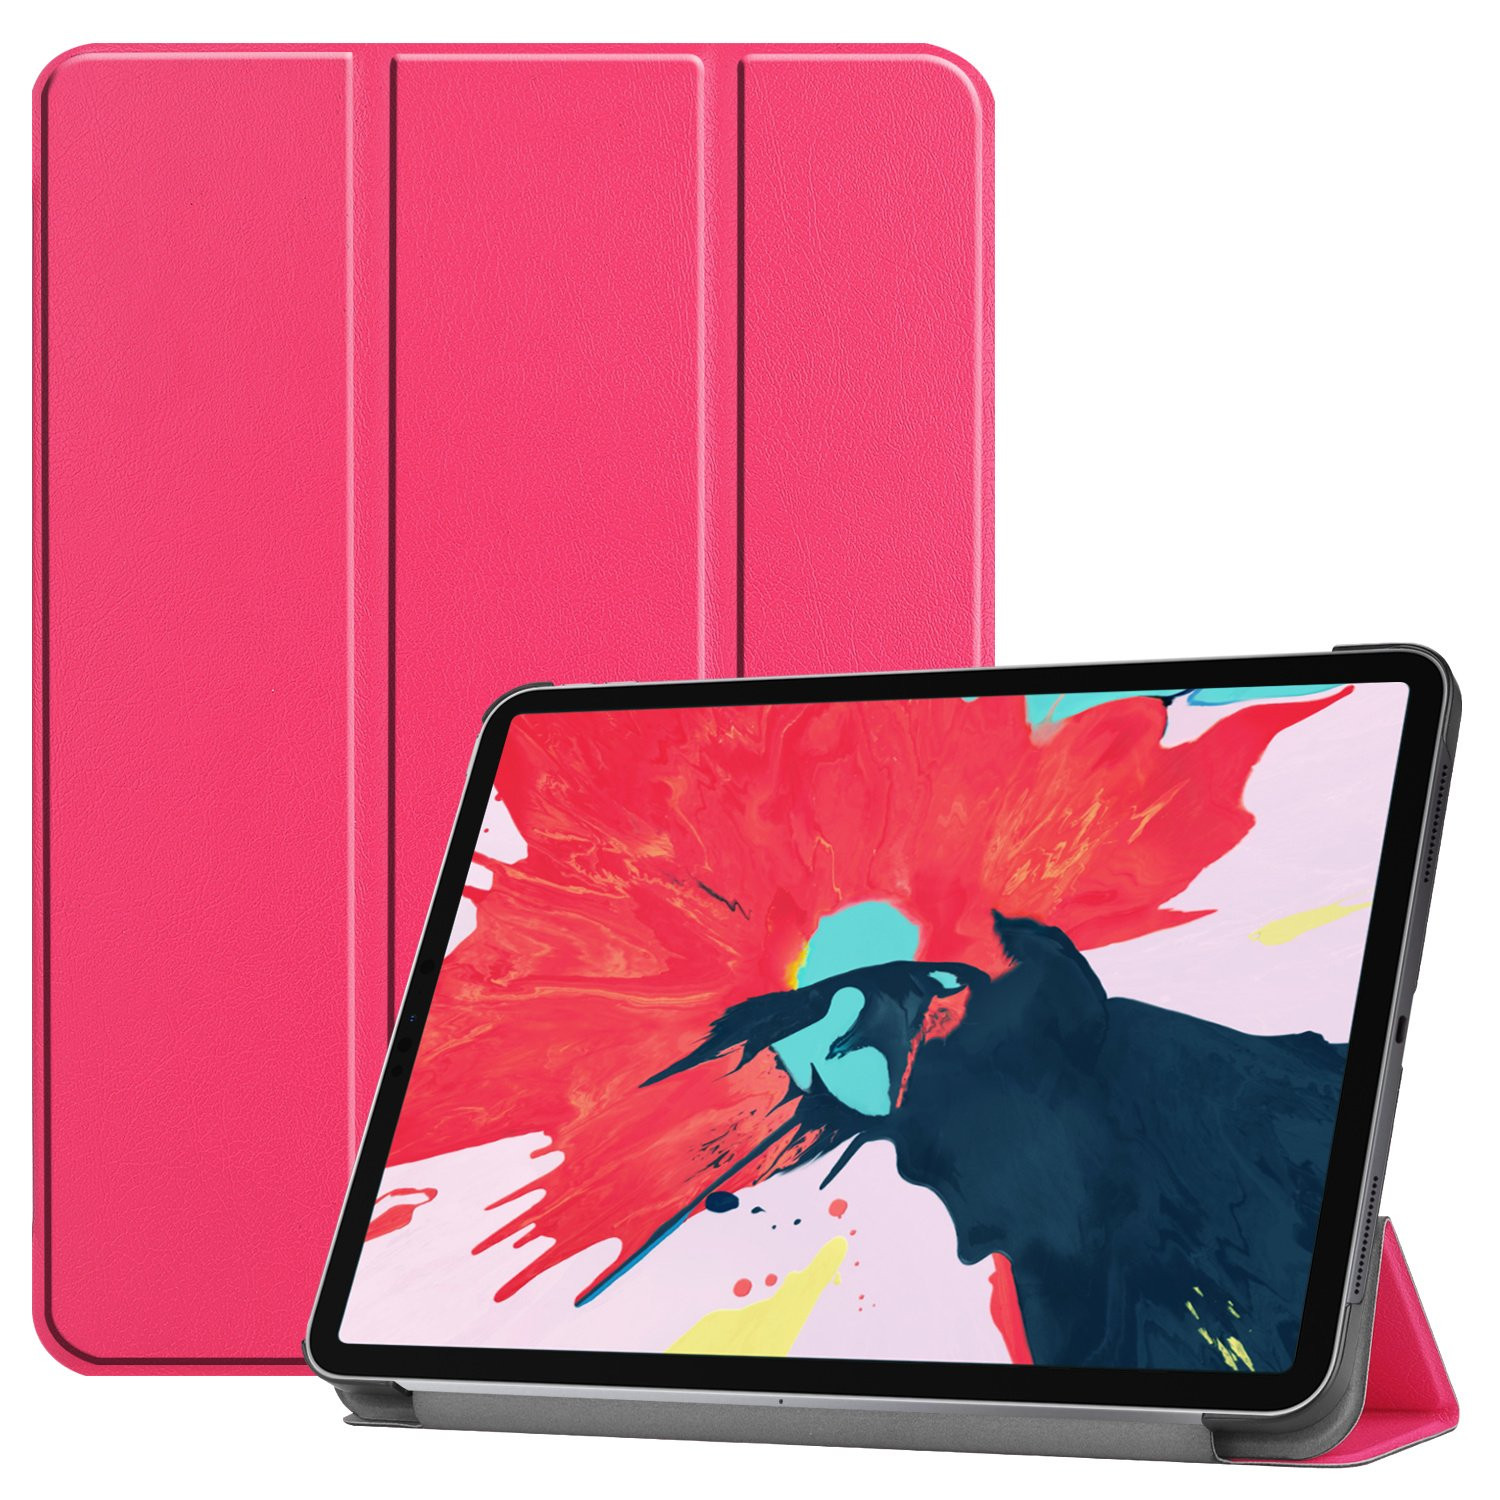 3-Vouw sleepcover hoes - iPad Pro 11 inch (2020) - Roze